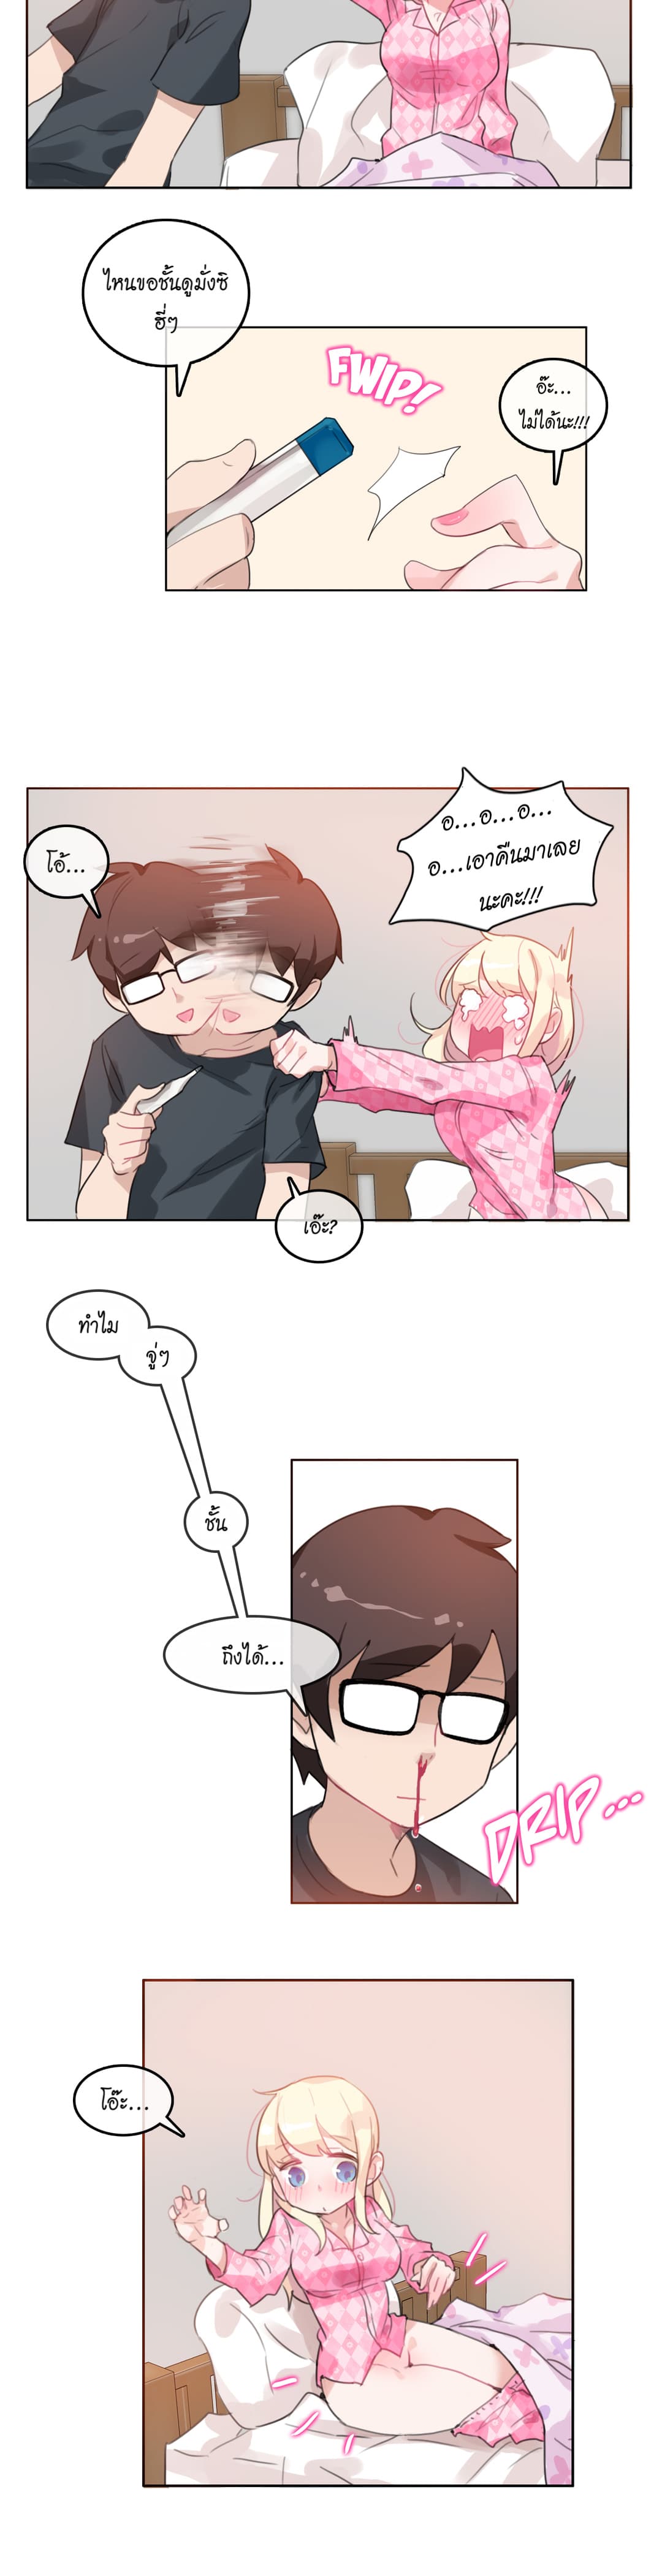 A Pervert’s Daily Life 15 (18)